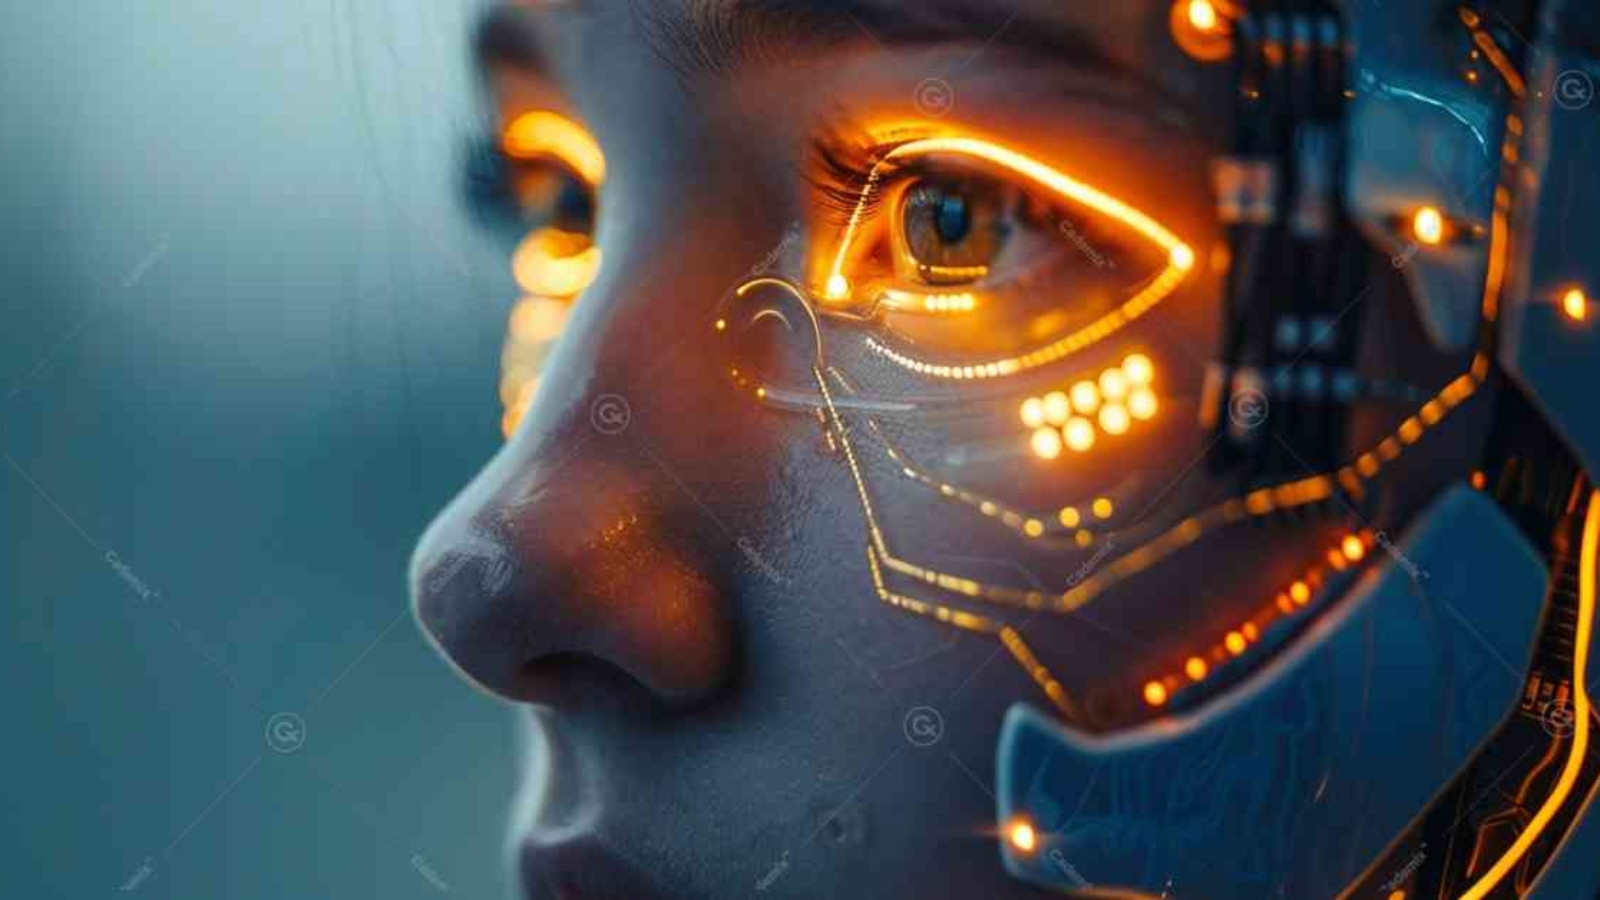 In this image, a woman's face can be seen with a robot on part of her face, which shows the close and inseparable connection between humans and technology, especially in artificial intelligence. In this article, the topic of job interview is discussed.